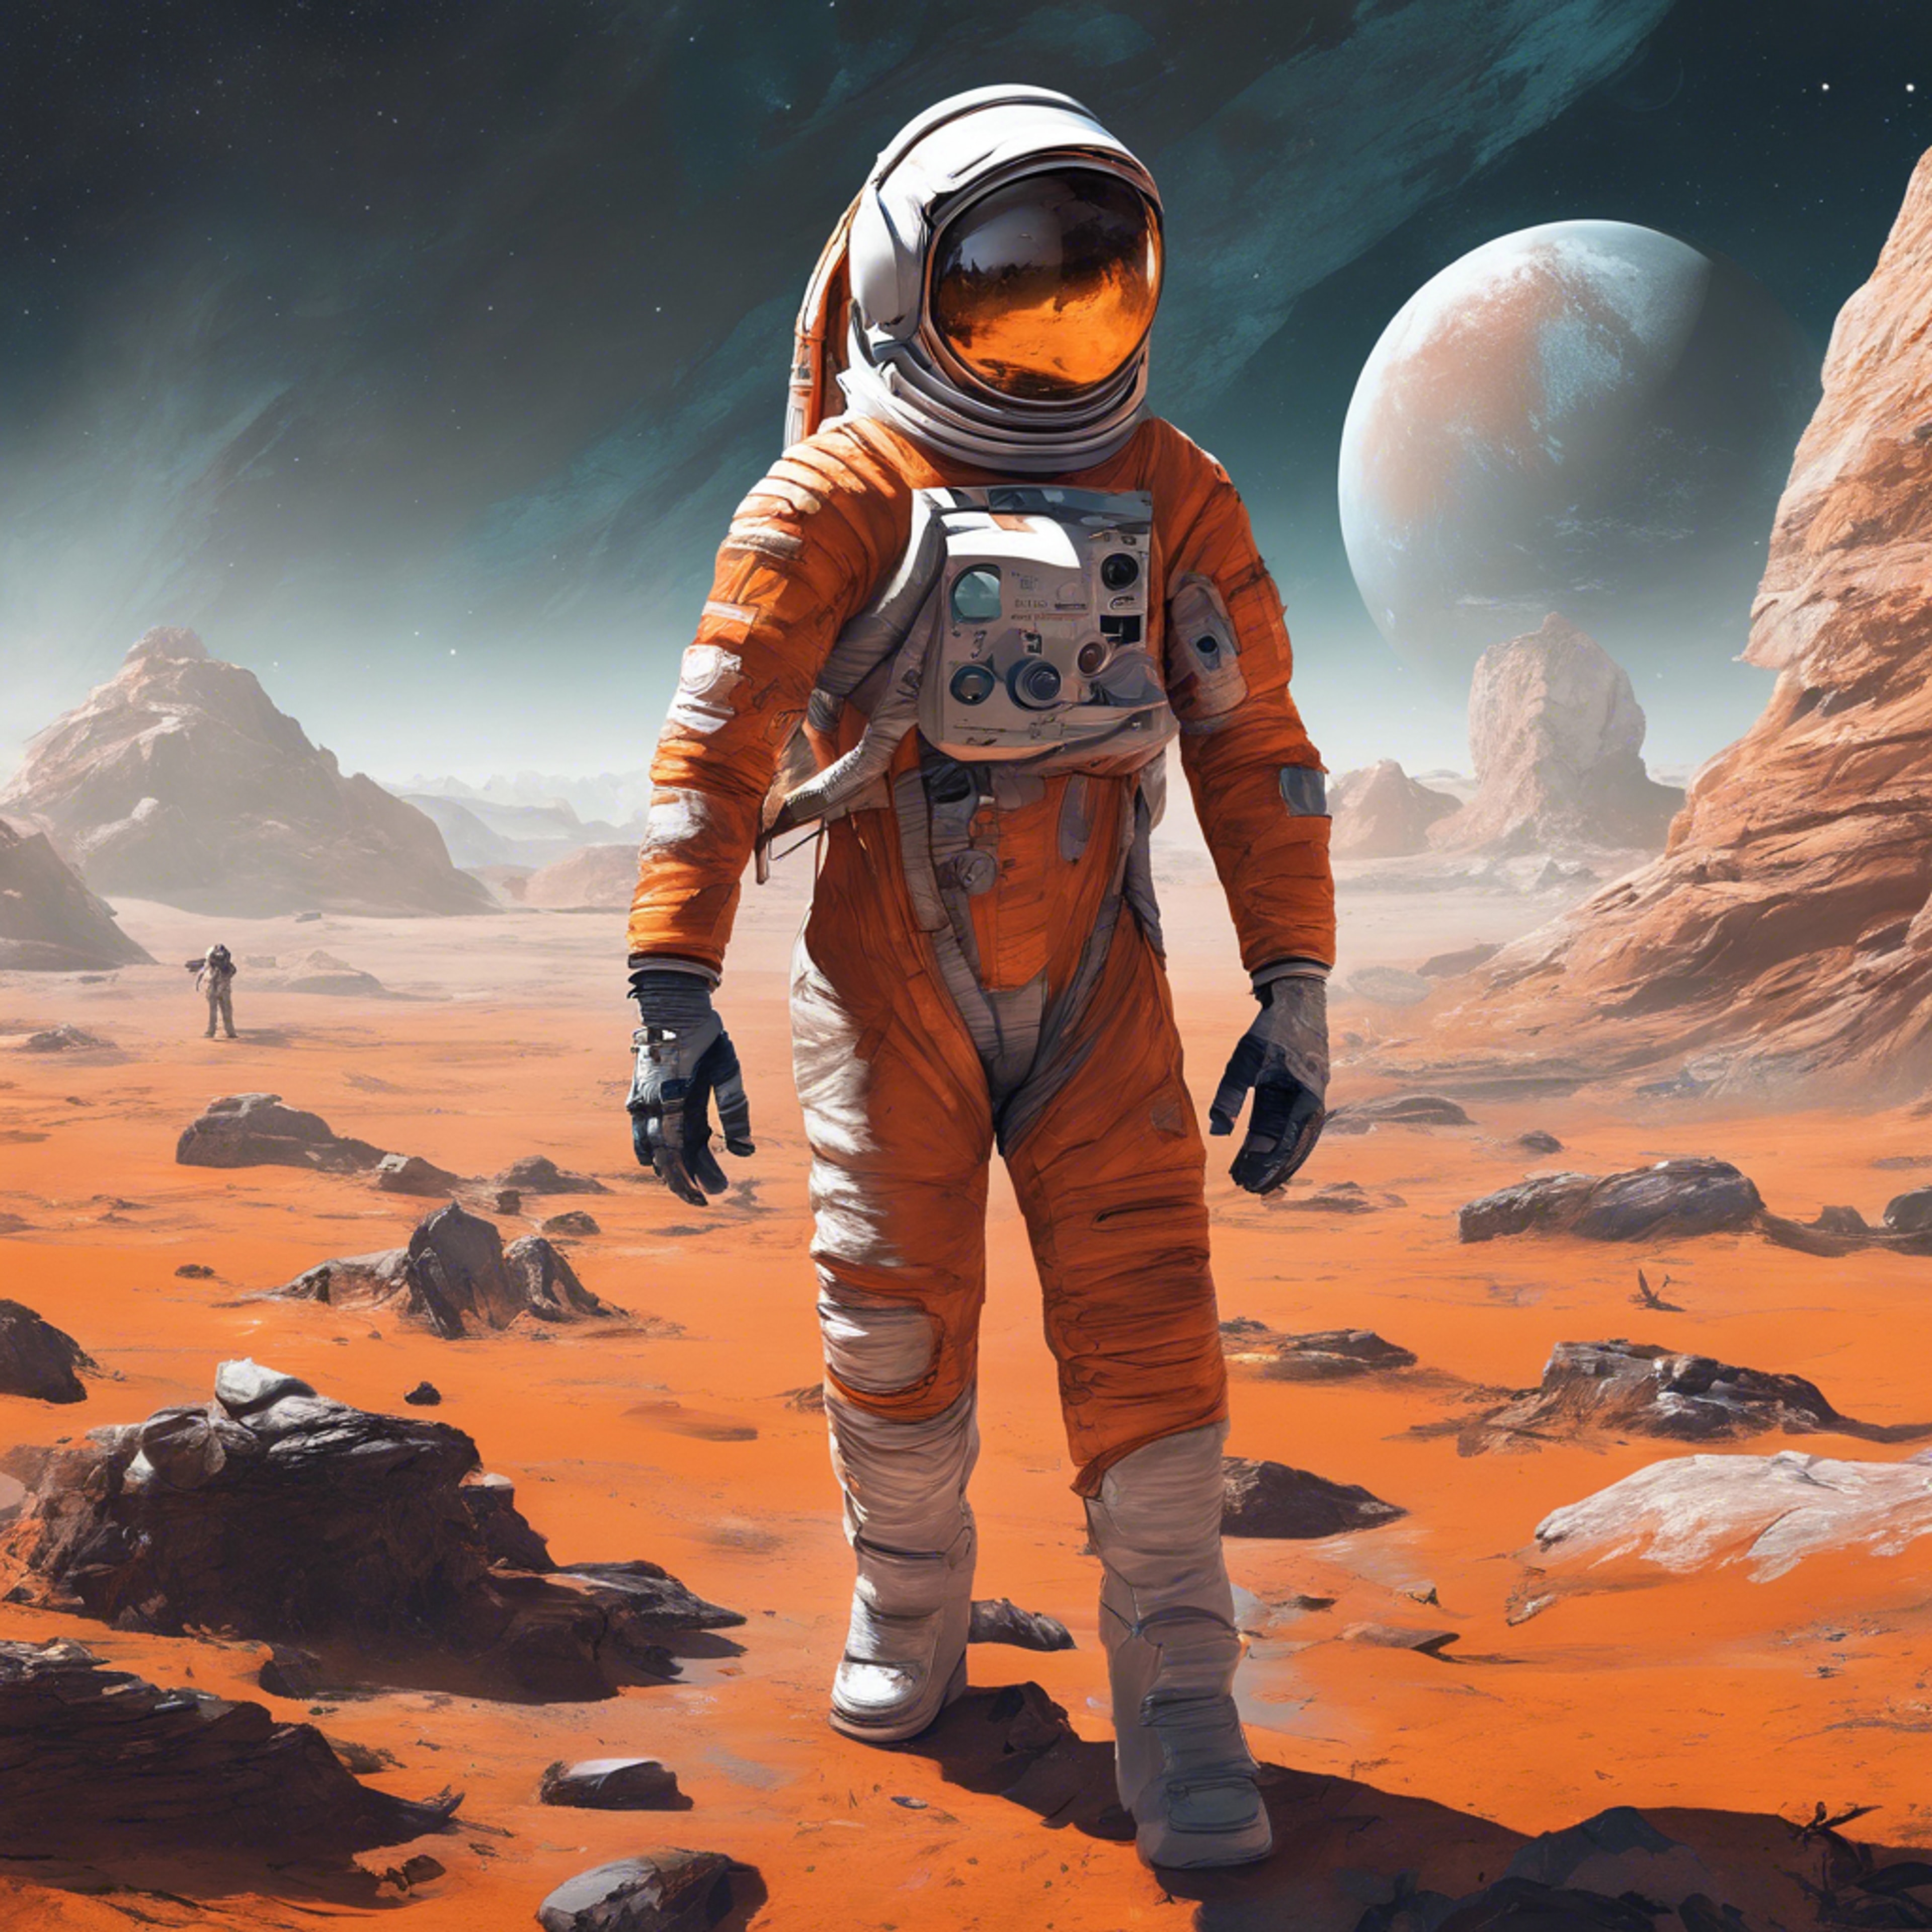 A space-themed video game featuring an astronaut in an orange and white suit exploring an alien planet. Hintergrund[5d2c49abc07a4c83ad01]